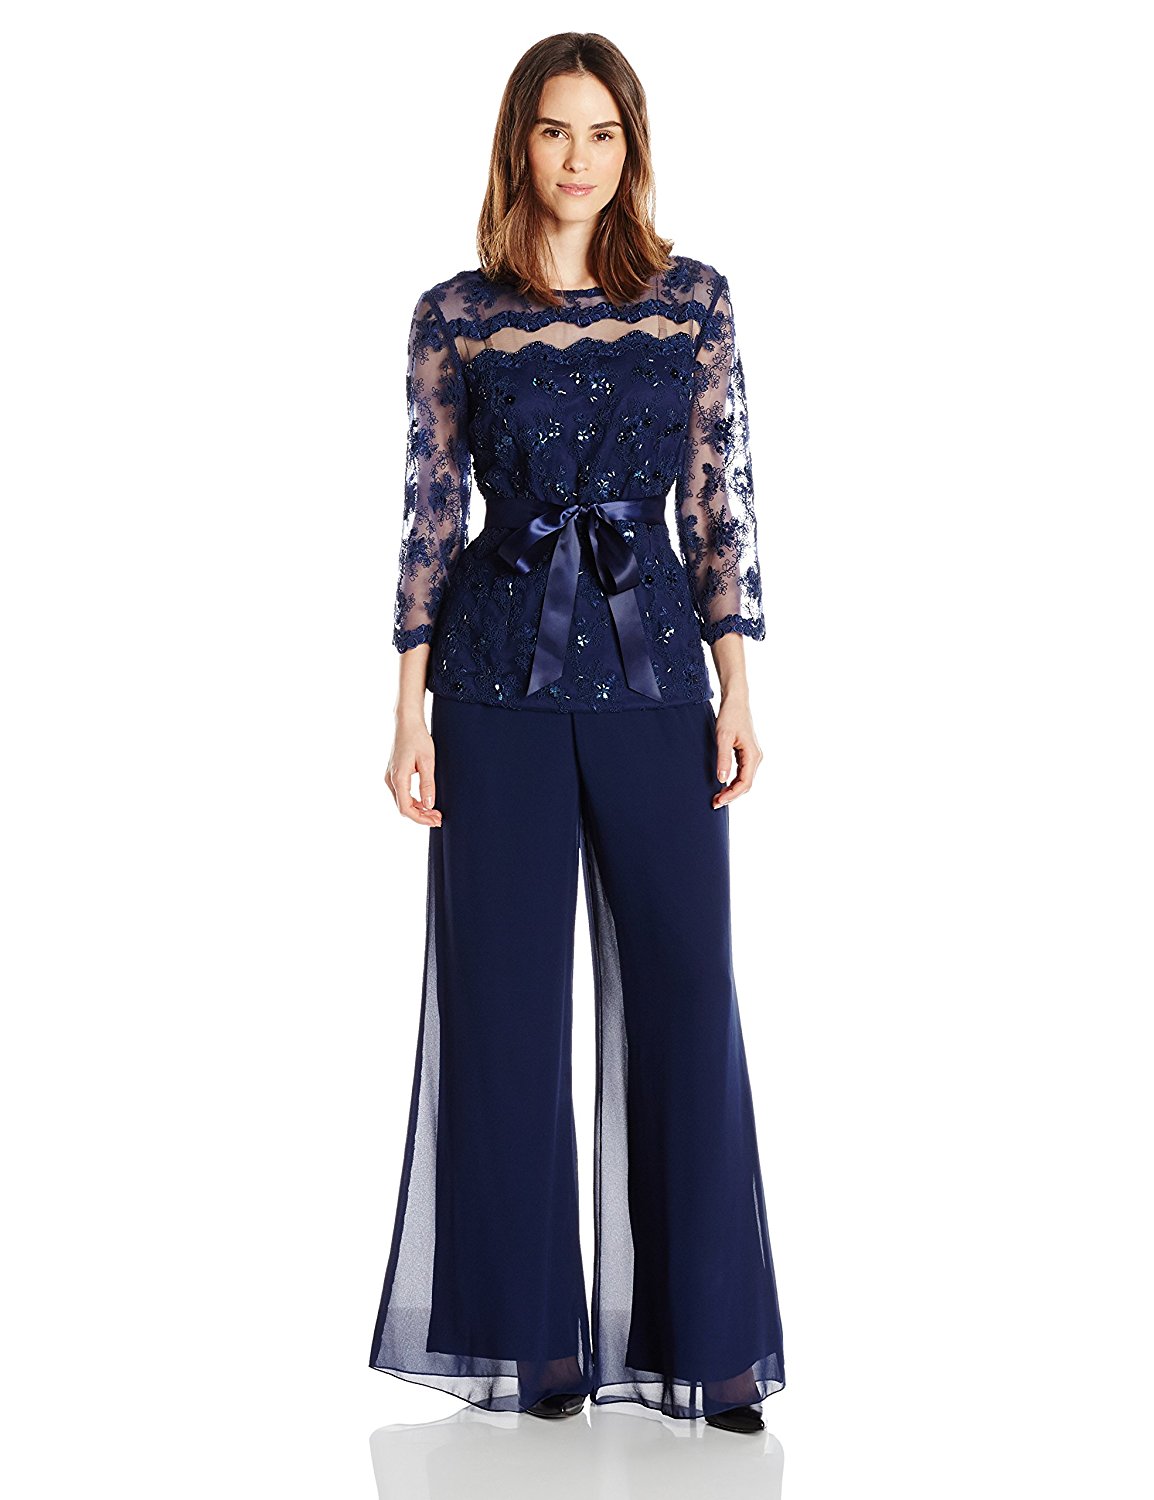 21 Best Mother of the Bride Pant Suits ...